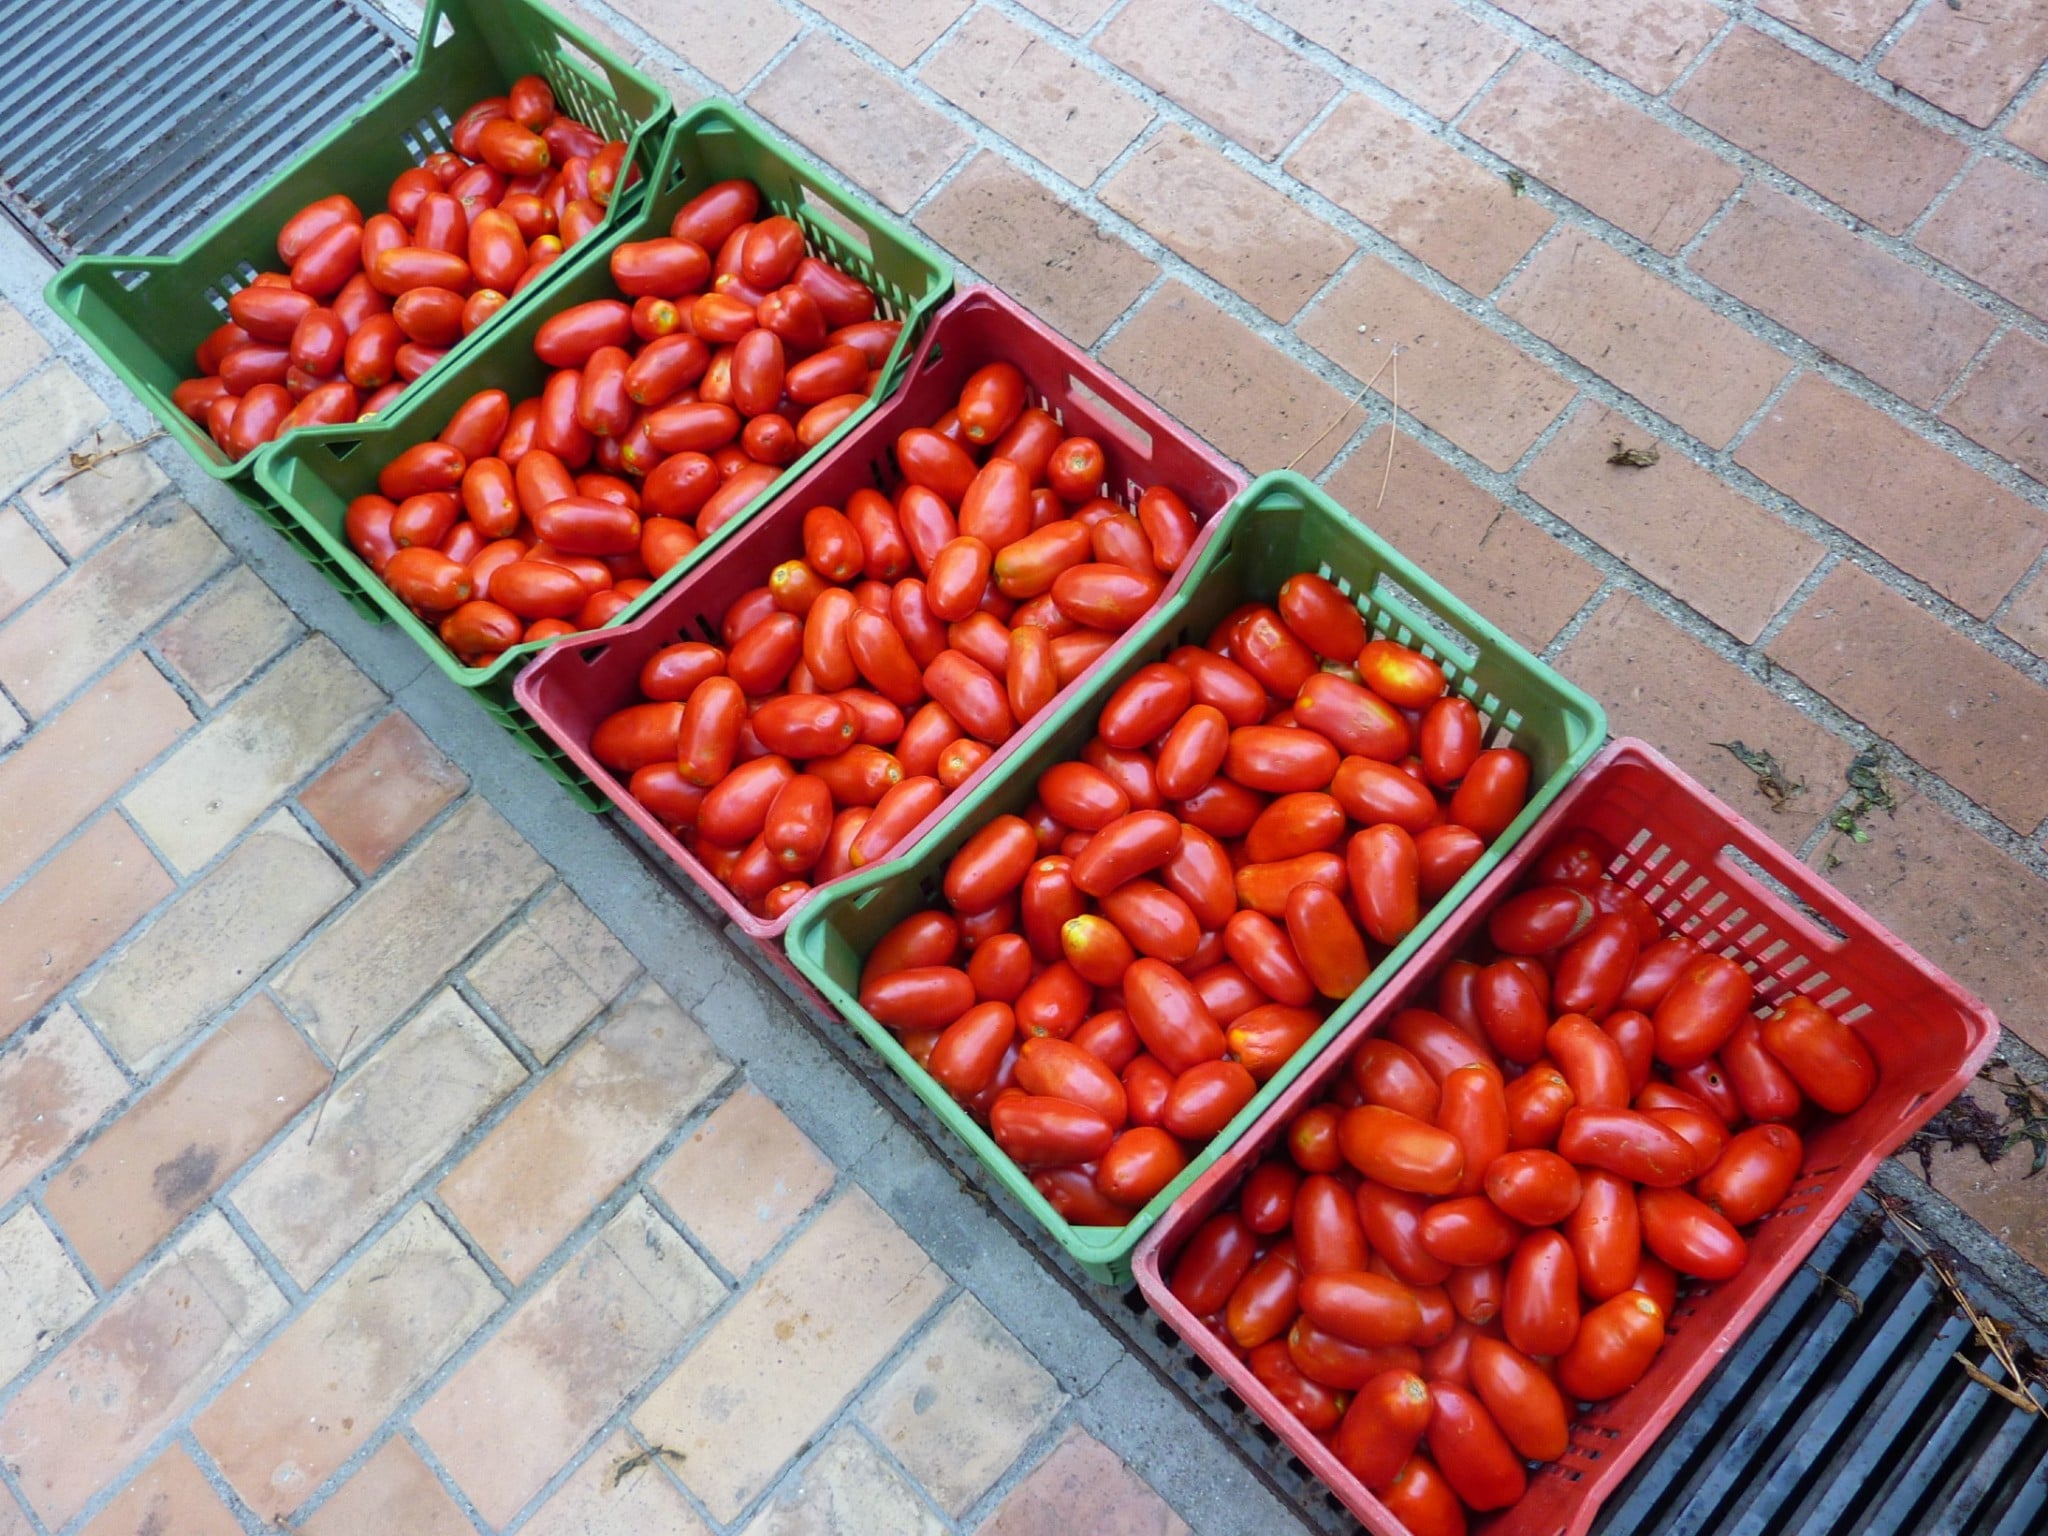 1 tons of tomatoes in crates